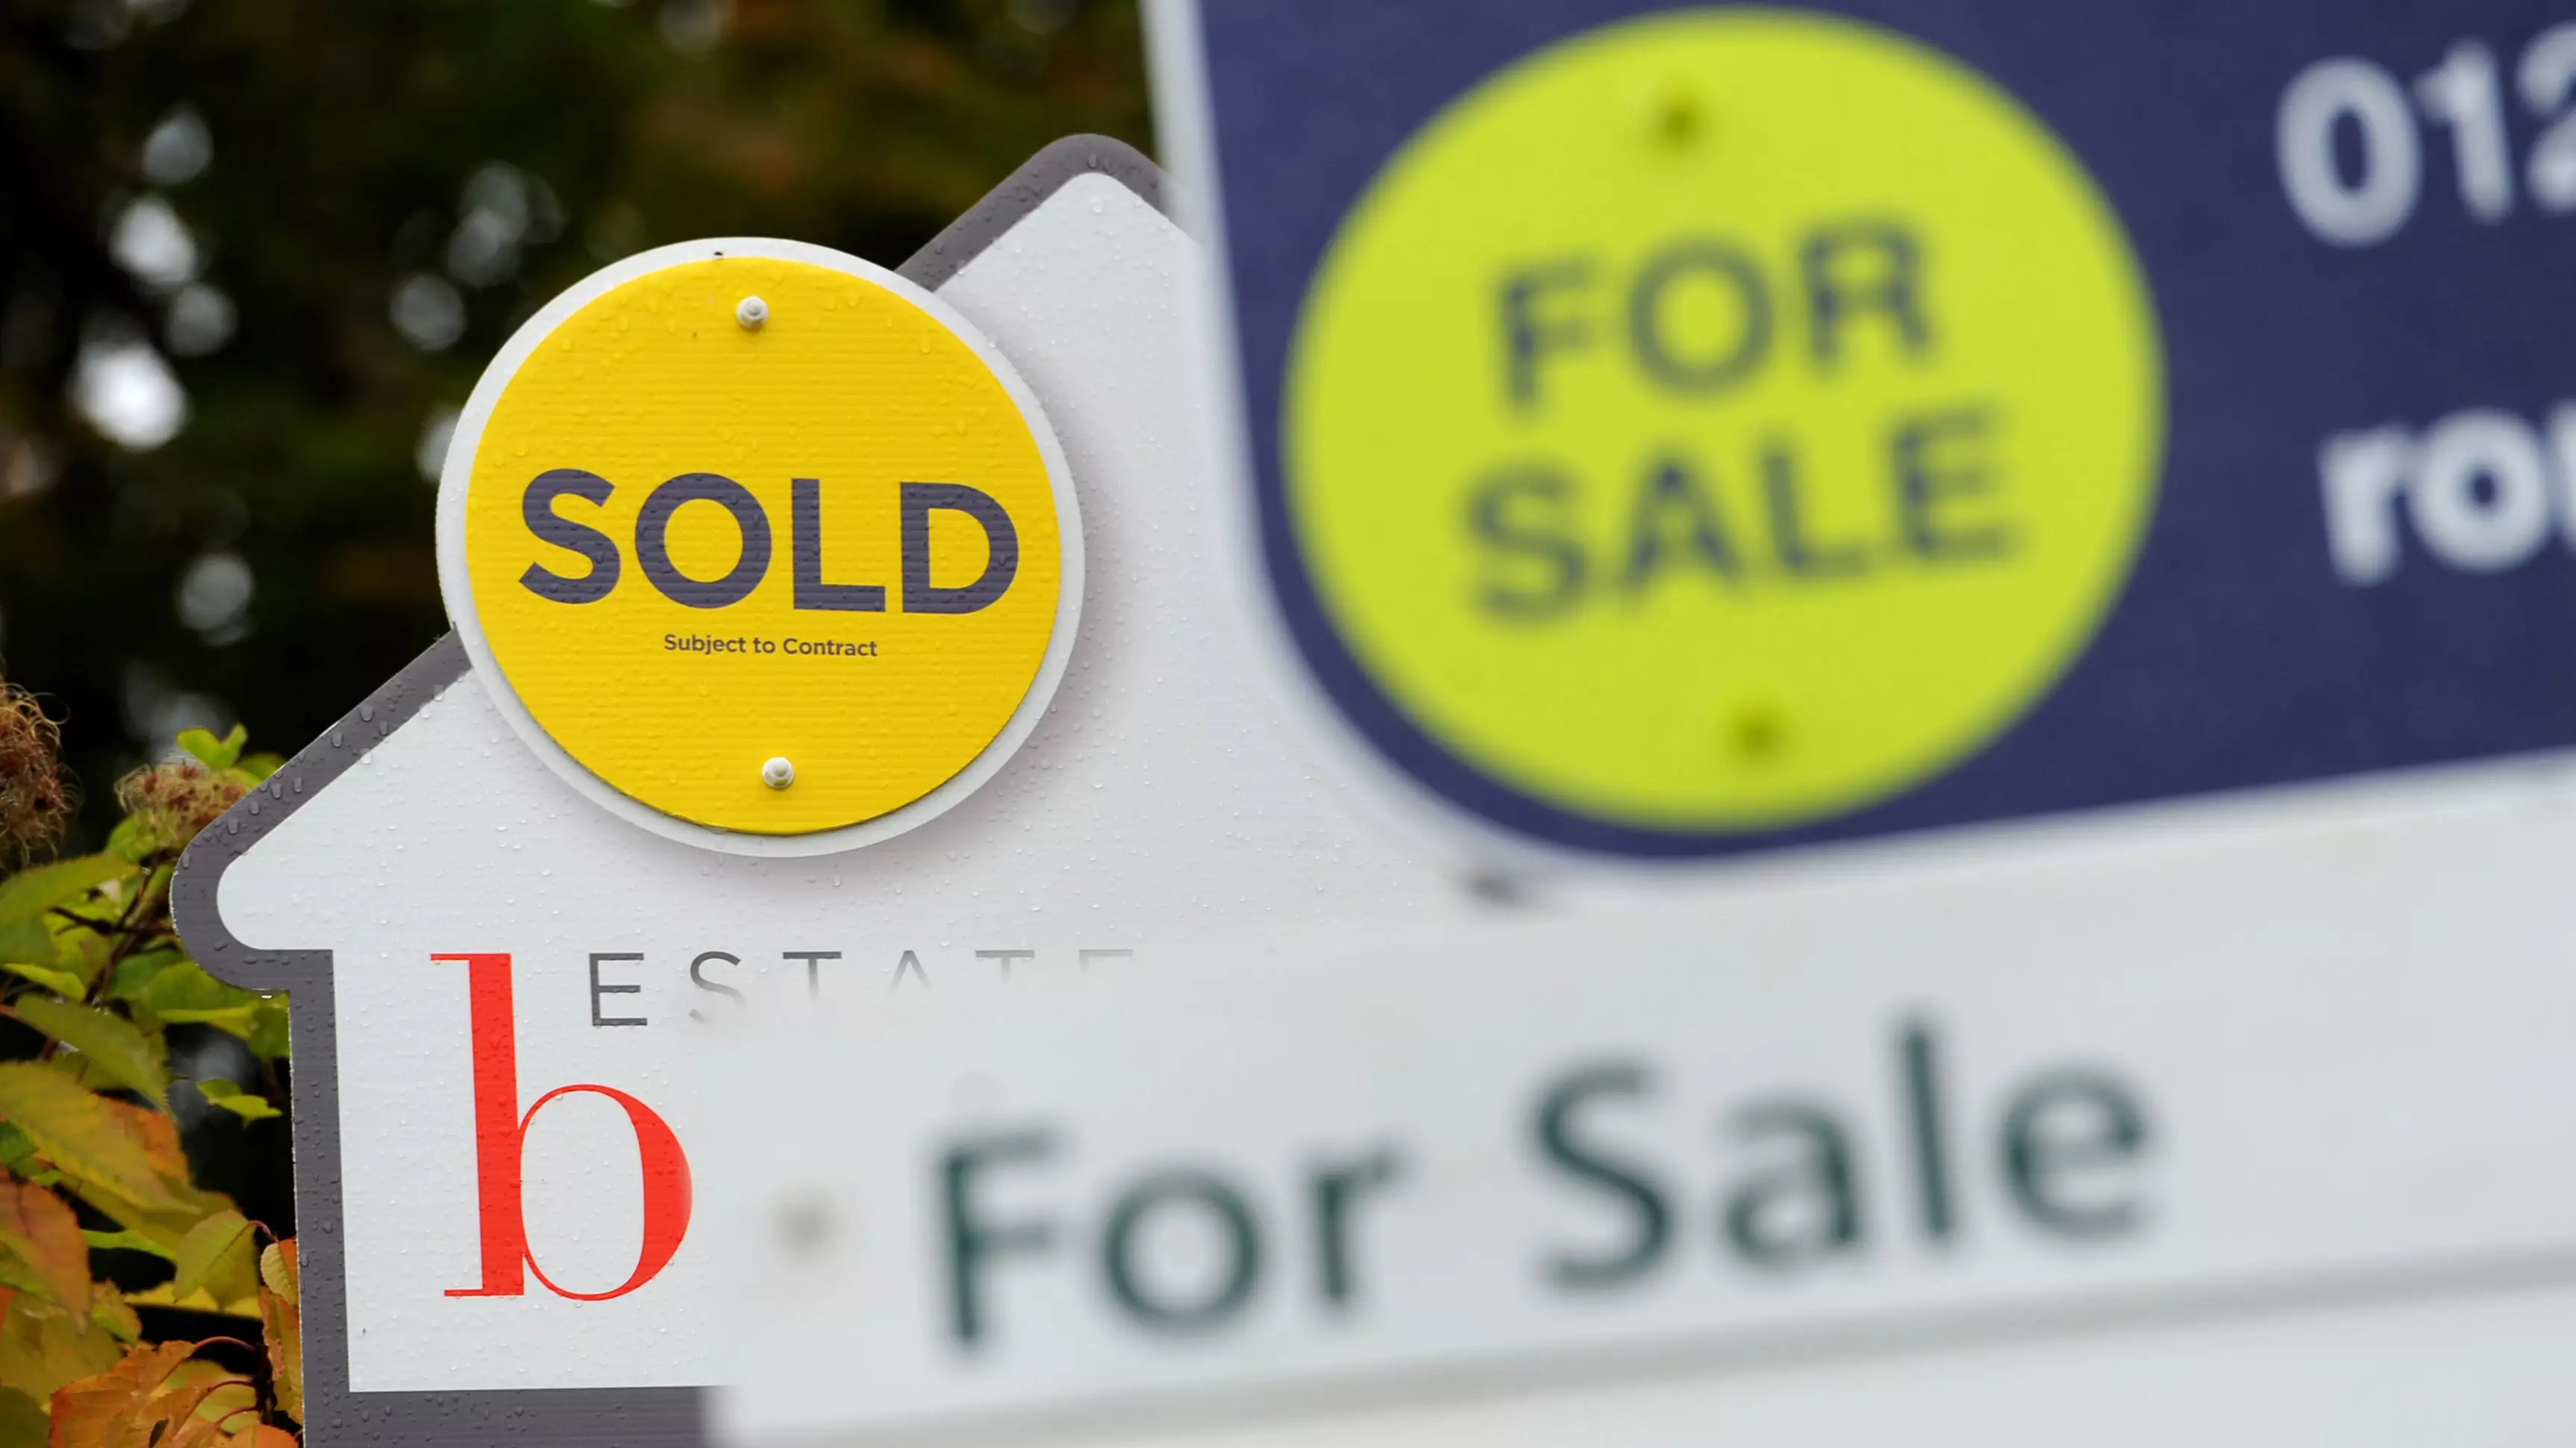 Average Deposit For First-Time Buyers Jumps By £10,000 To Record High Of £57,000